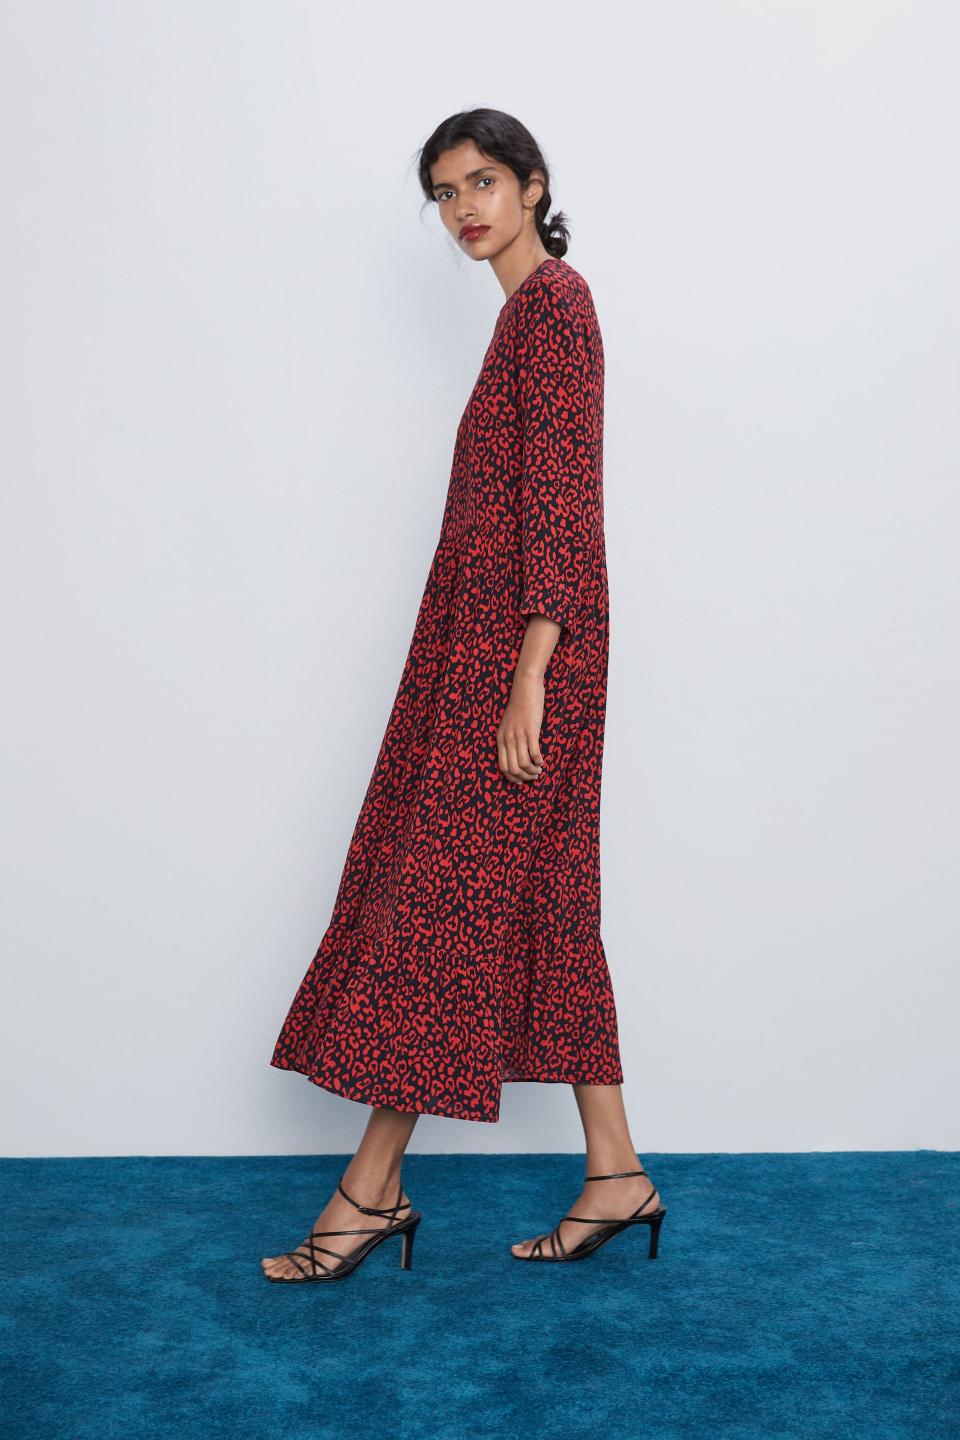 The printed dress comes in a bold shade of red and costs £49.99 [Photo: Zara]